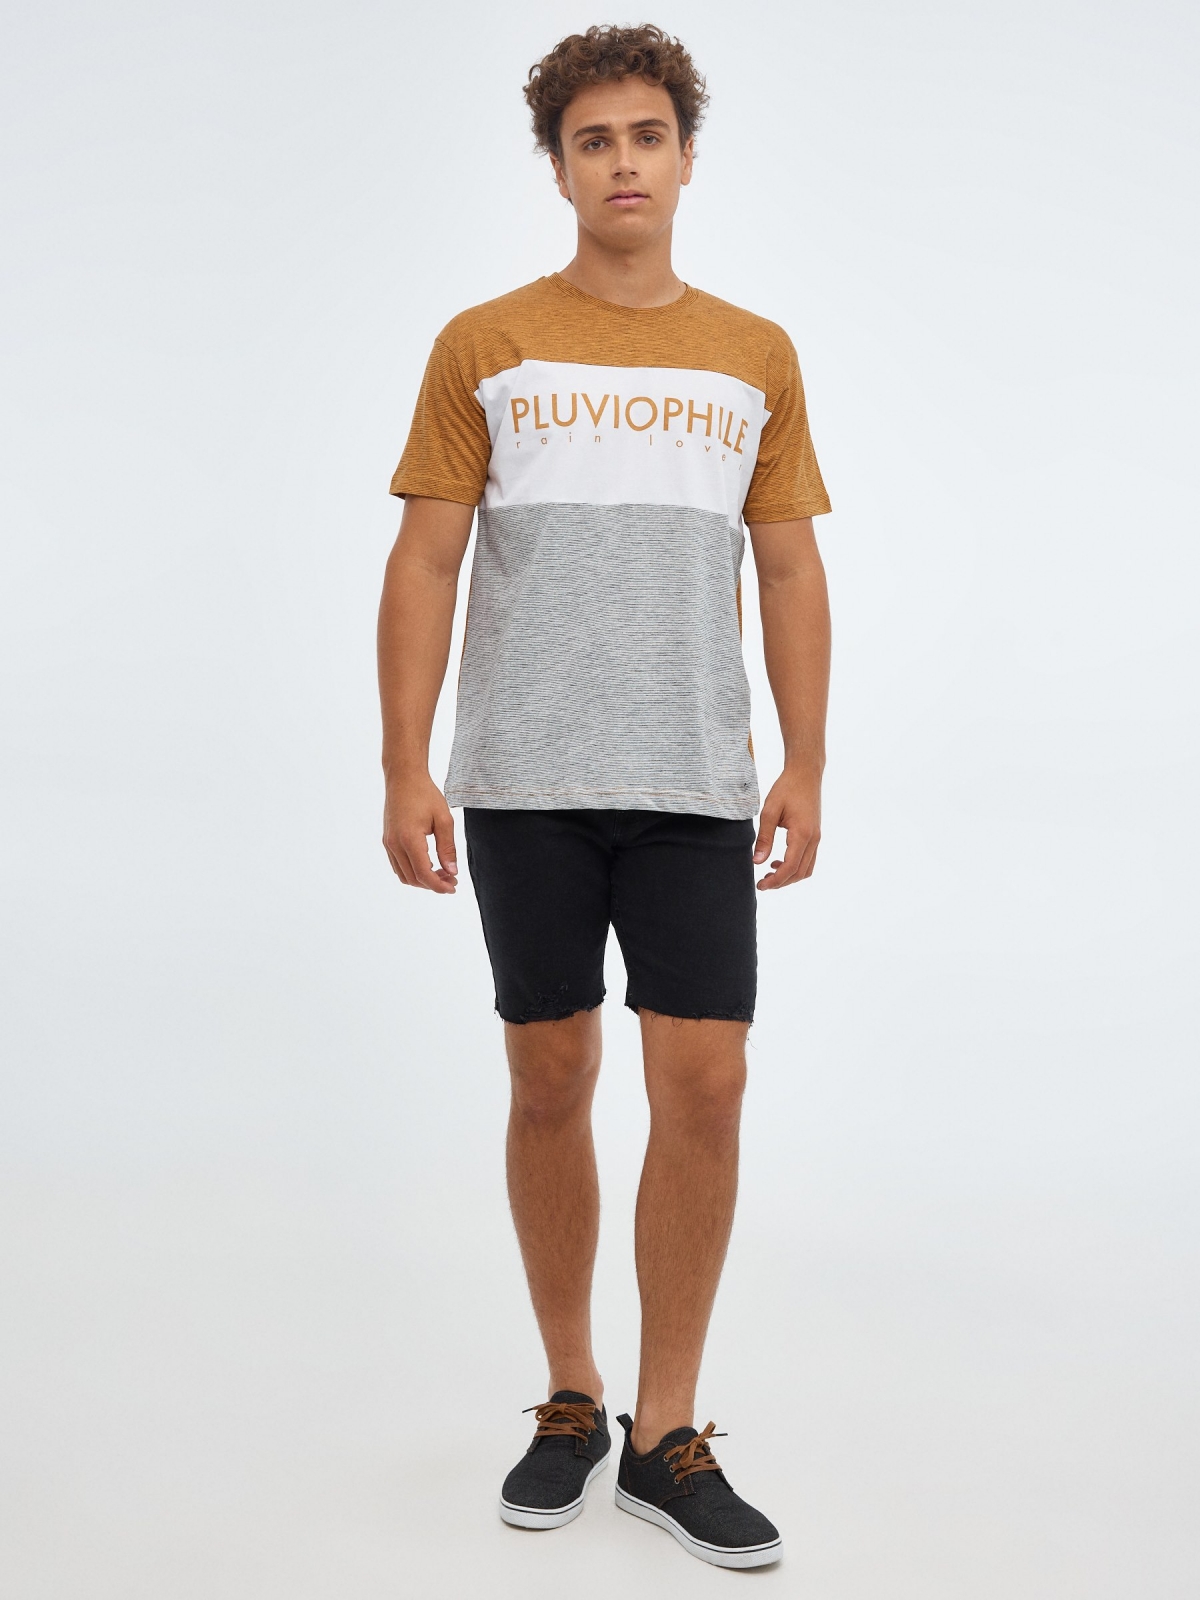 T-shirt Pluviophile ocre vista geral frontal